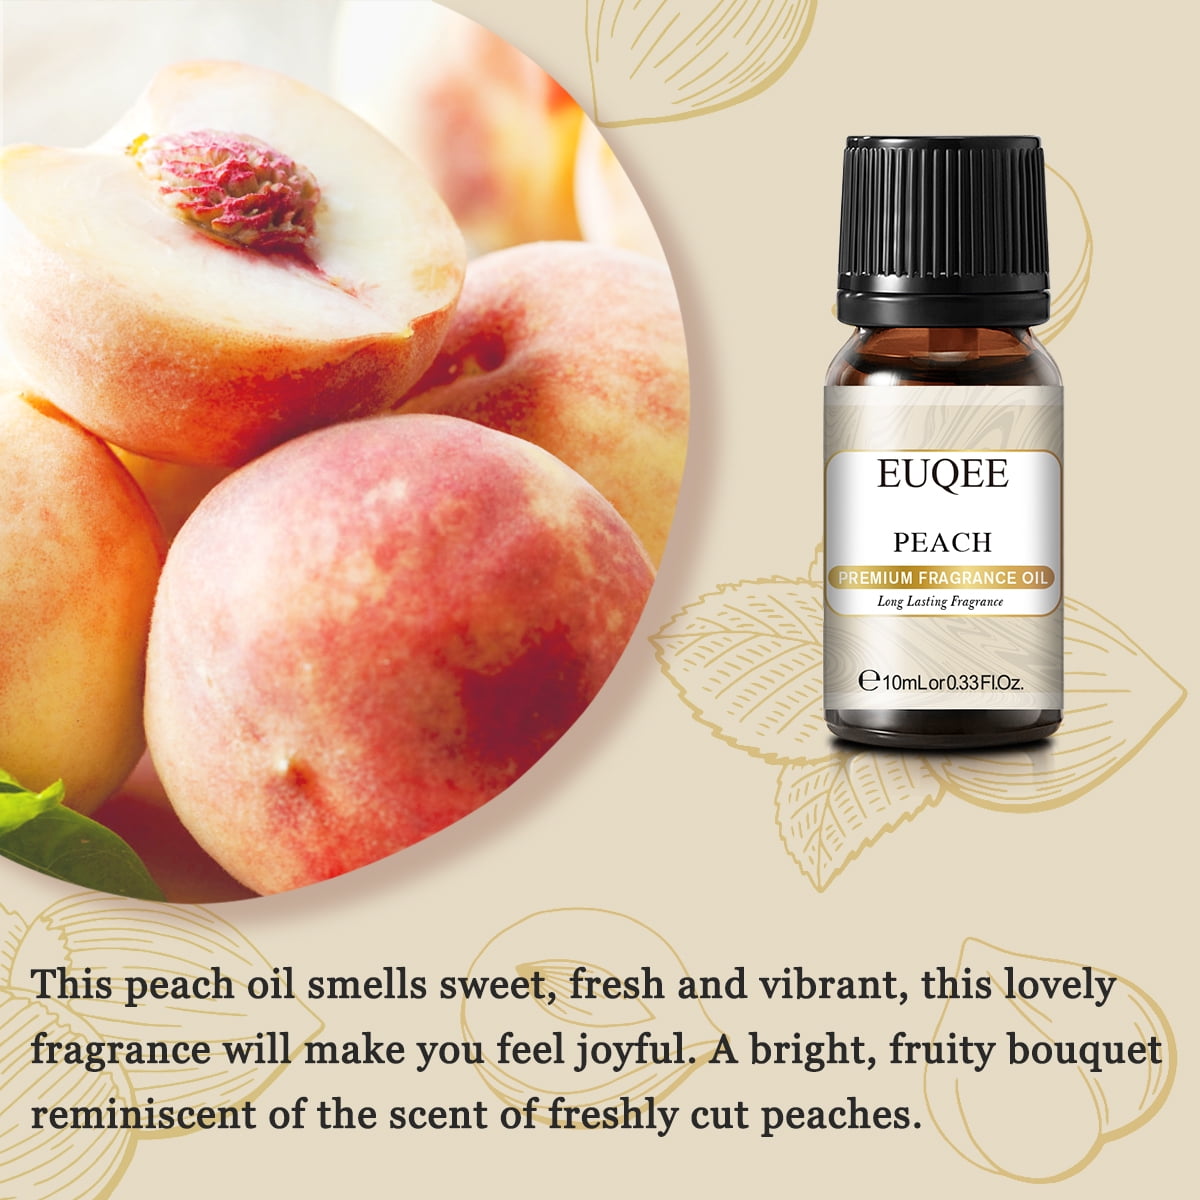 Good Essential – Professional Peach Fragrance Oil 30 ml for Perfume,  Lotions, Candles, Soaps, Diffuser 1 fl oz